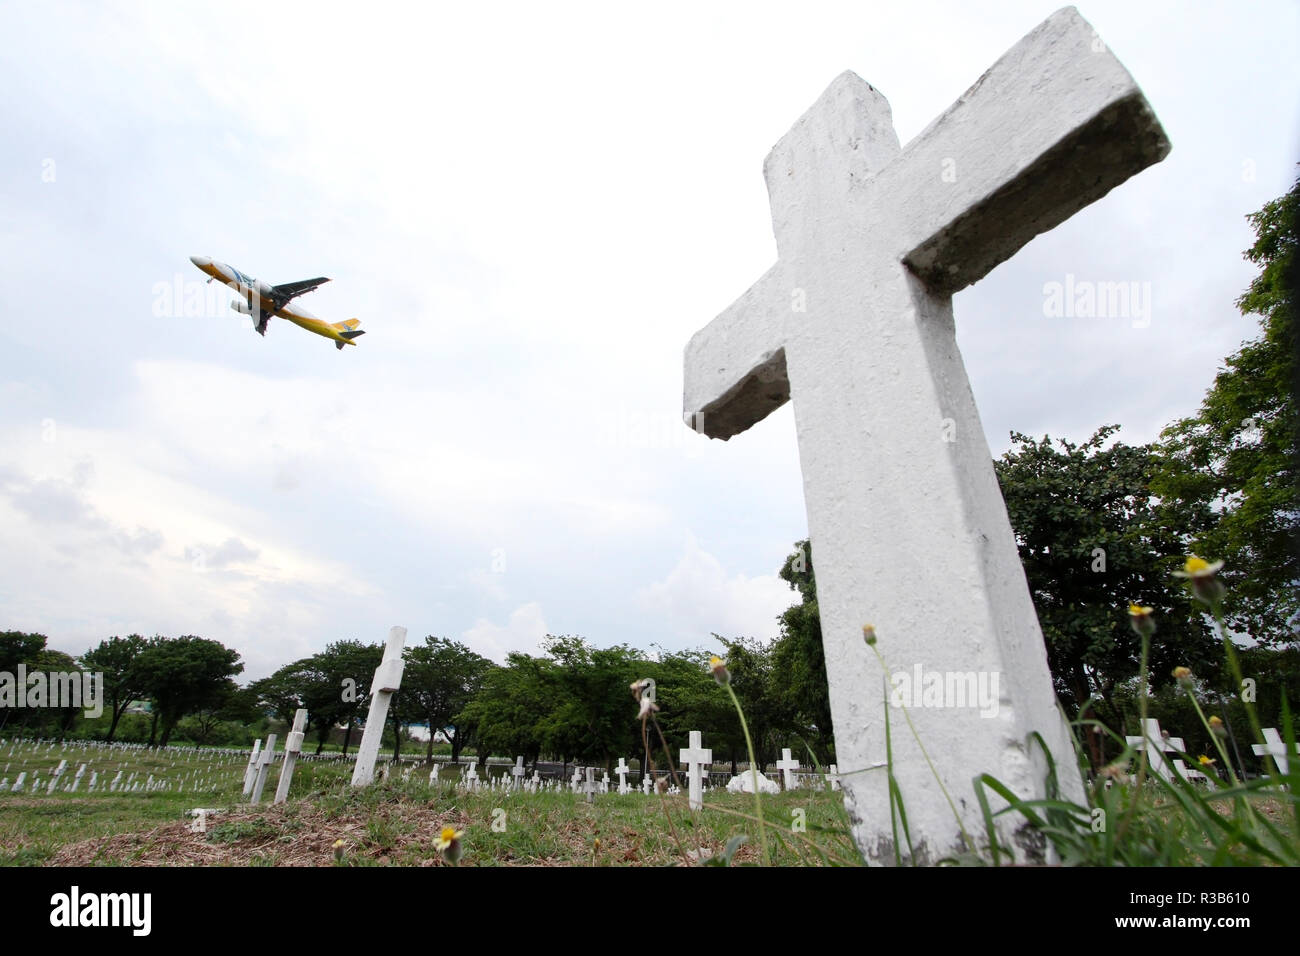 A commercial aircraft is seen flying above the Heroes' Cemetery, also known as Libingan ng mga Bayani, in Taguig City, south of Manila, Philippines. Stock Photo